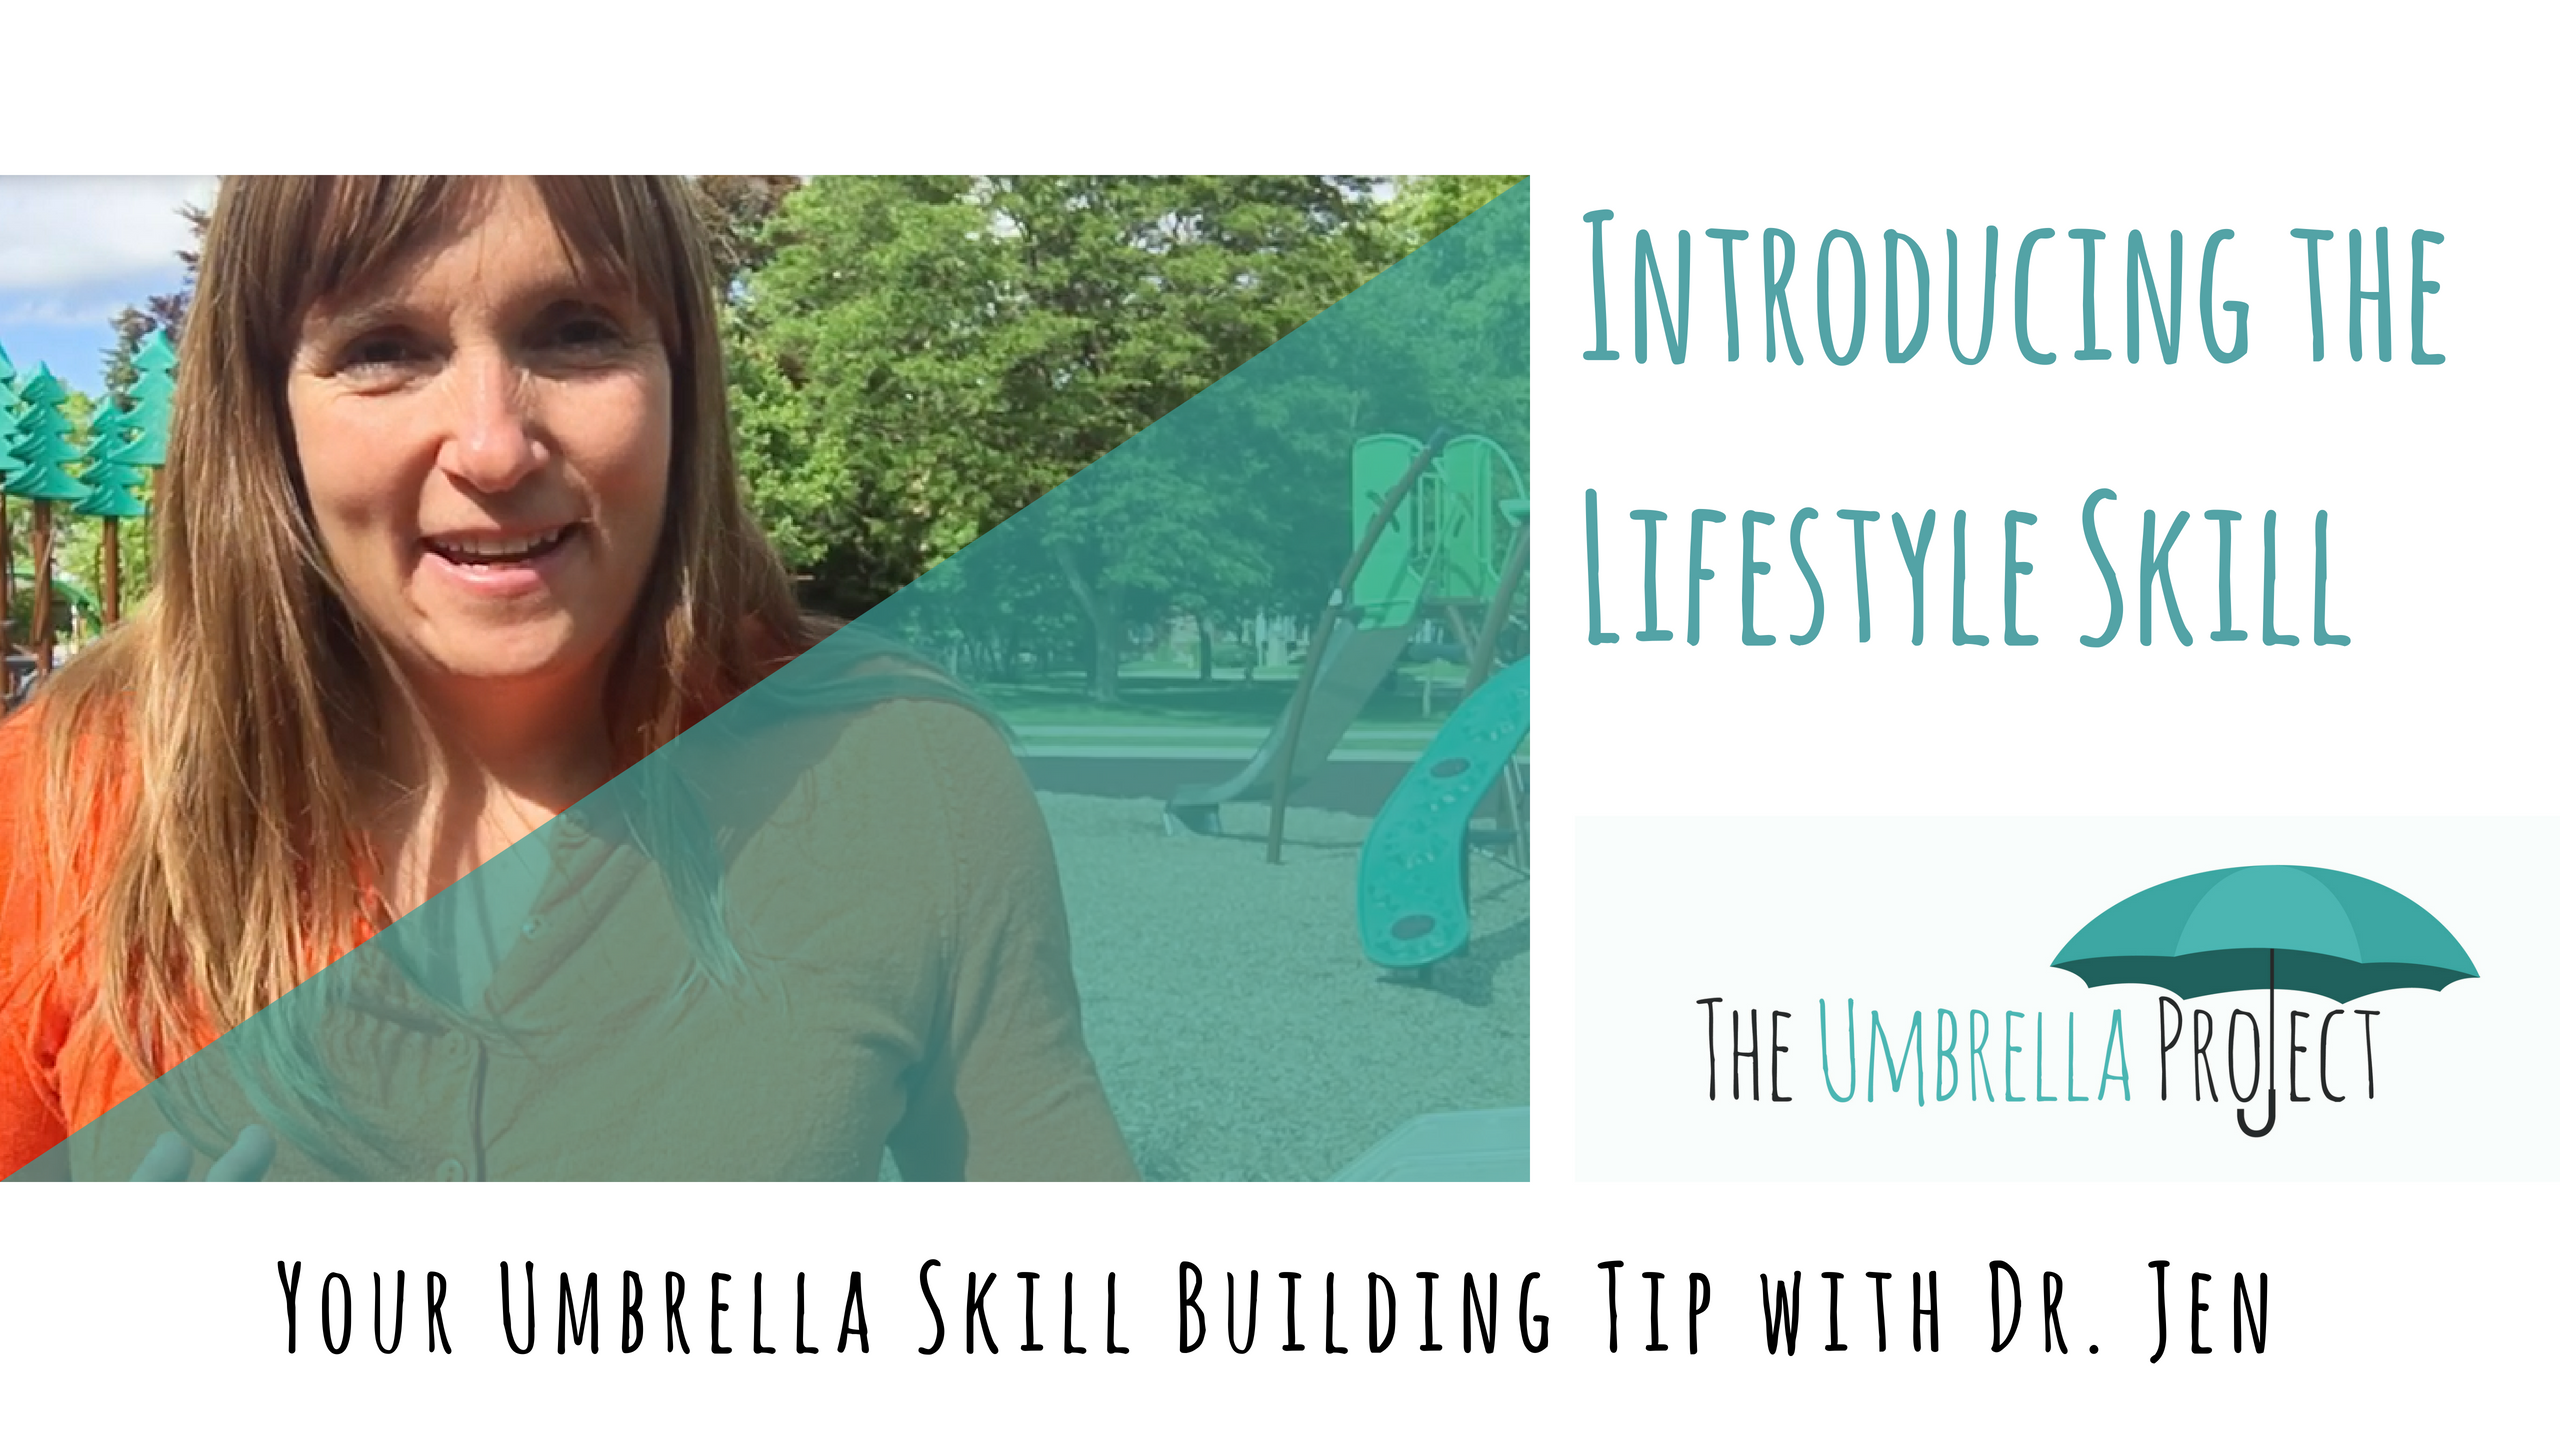 Introducing the Lifestyle Skill: Your Umbrella Skill Building Tip with Dr. Jen